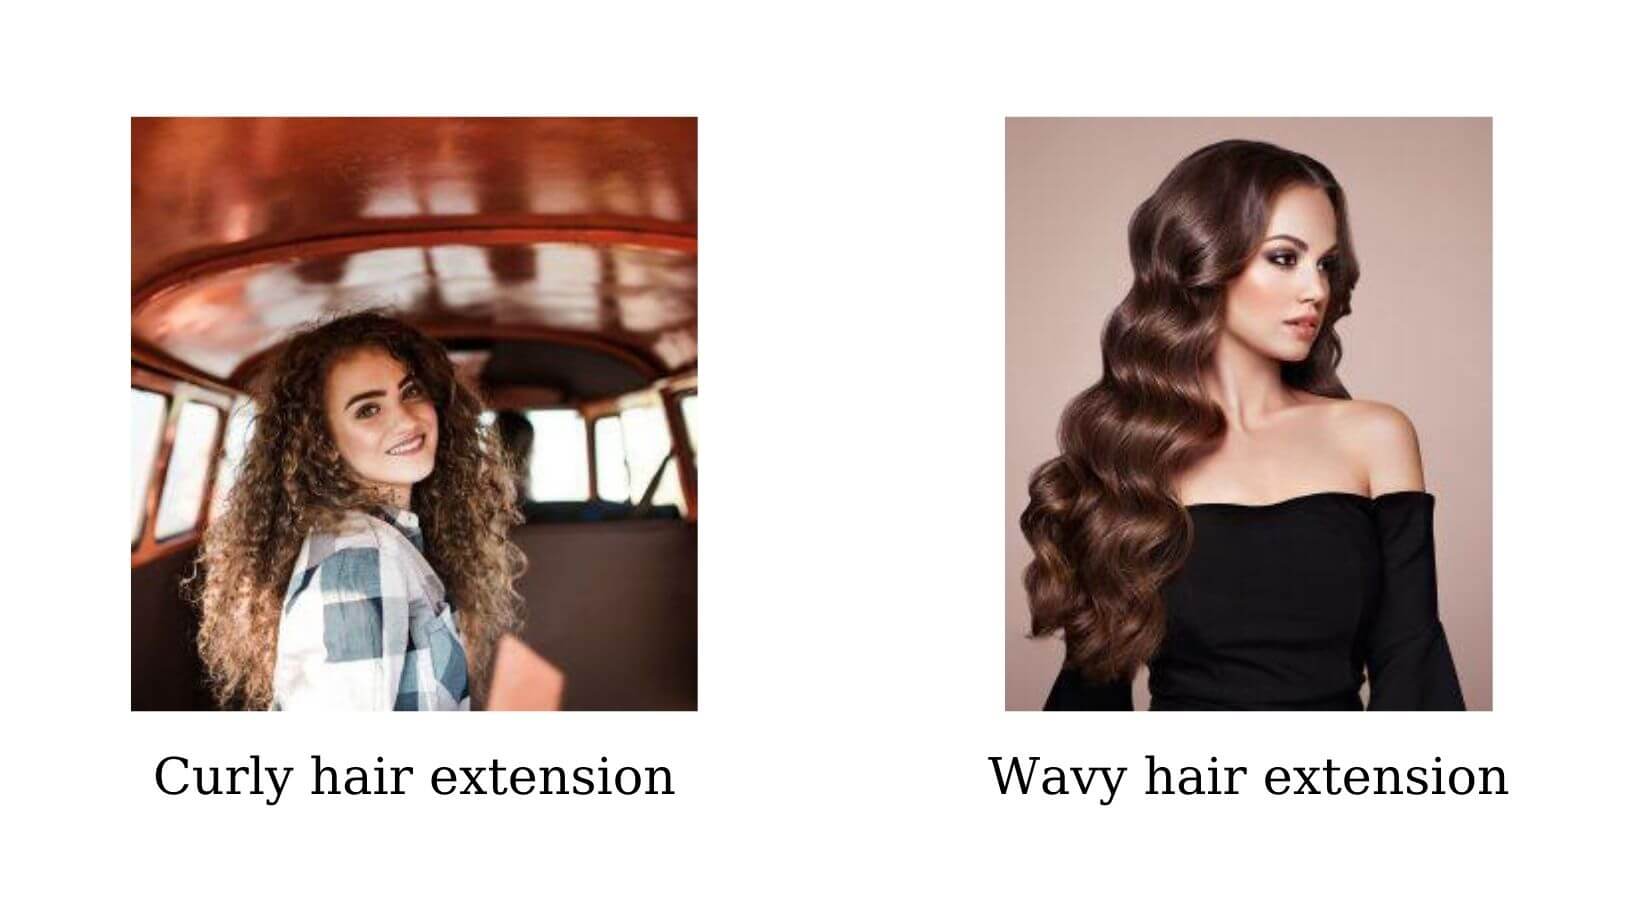 differences-between-curly-hair-extension-and-wavy-hair-extension2